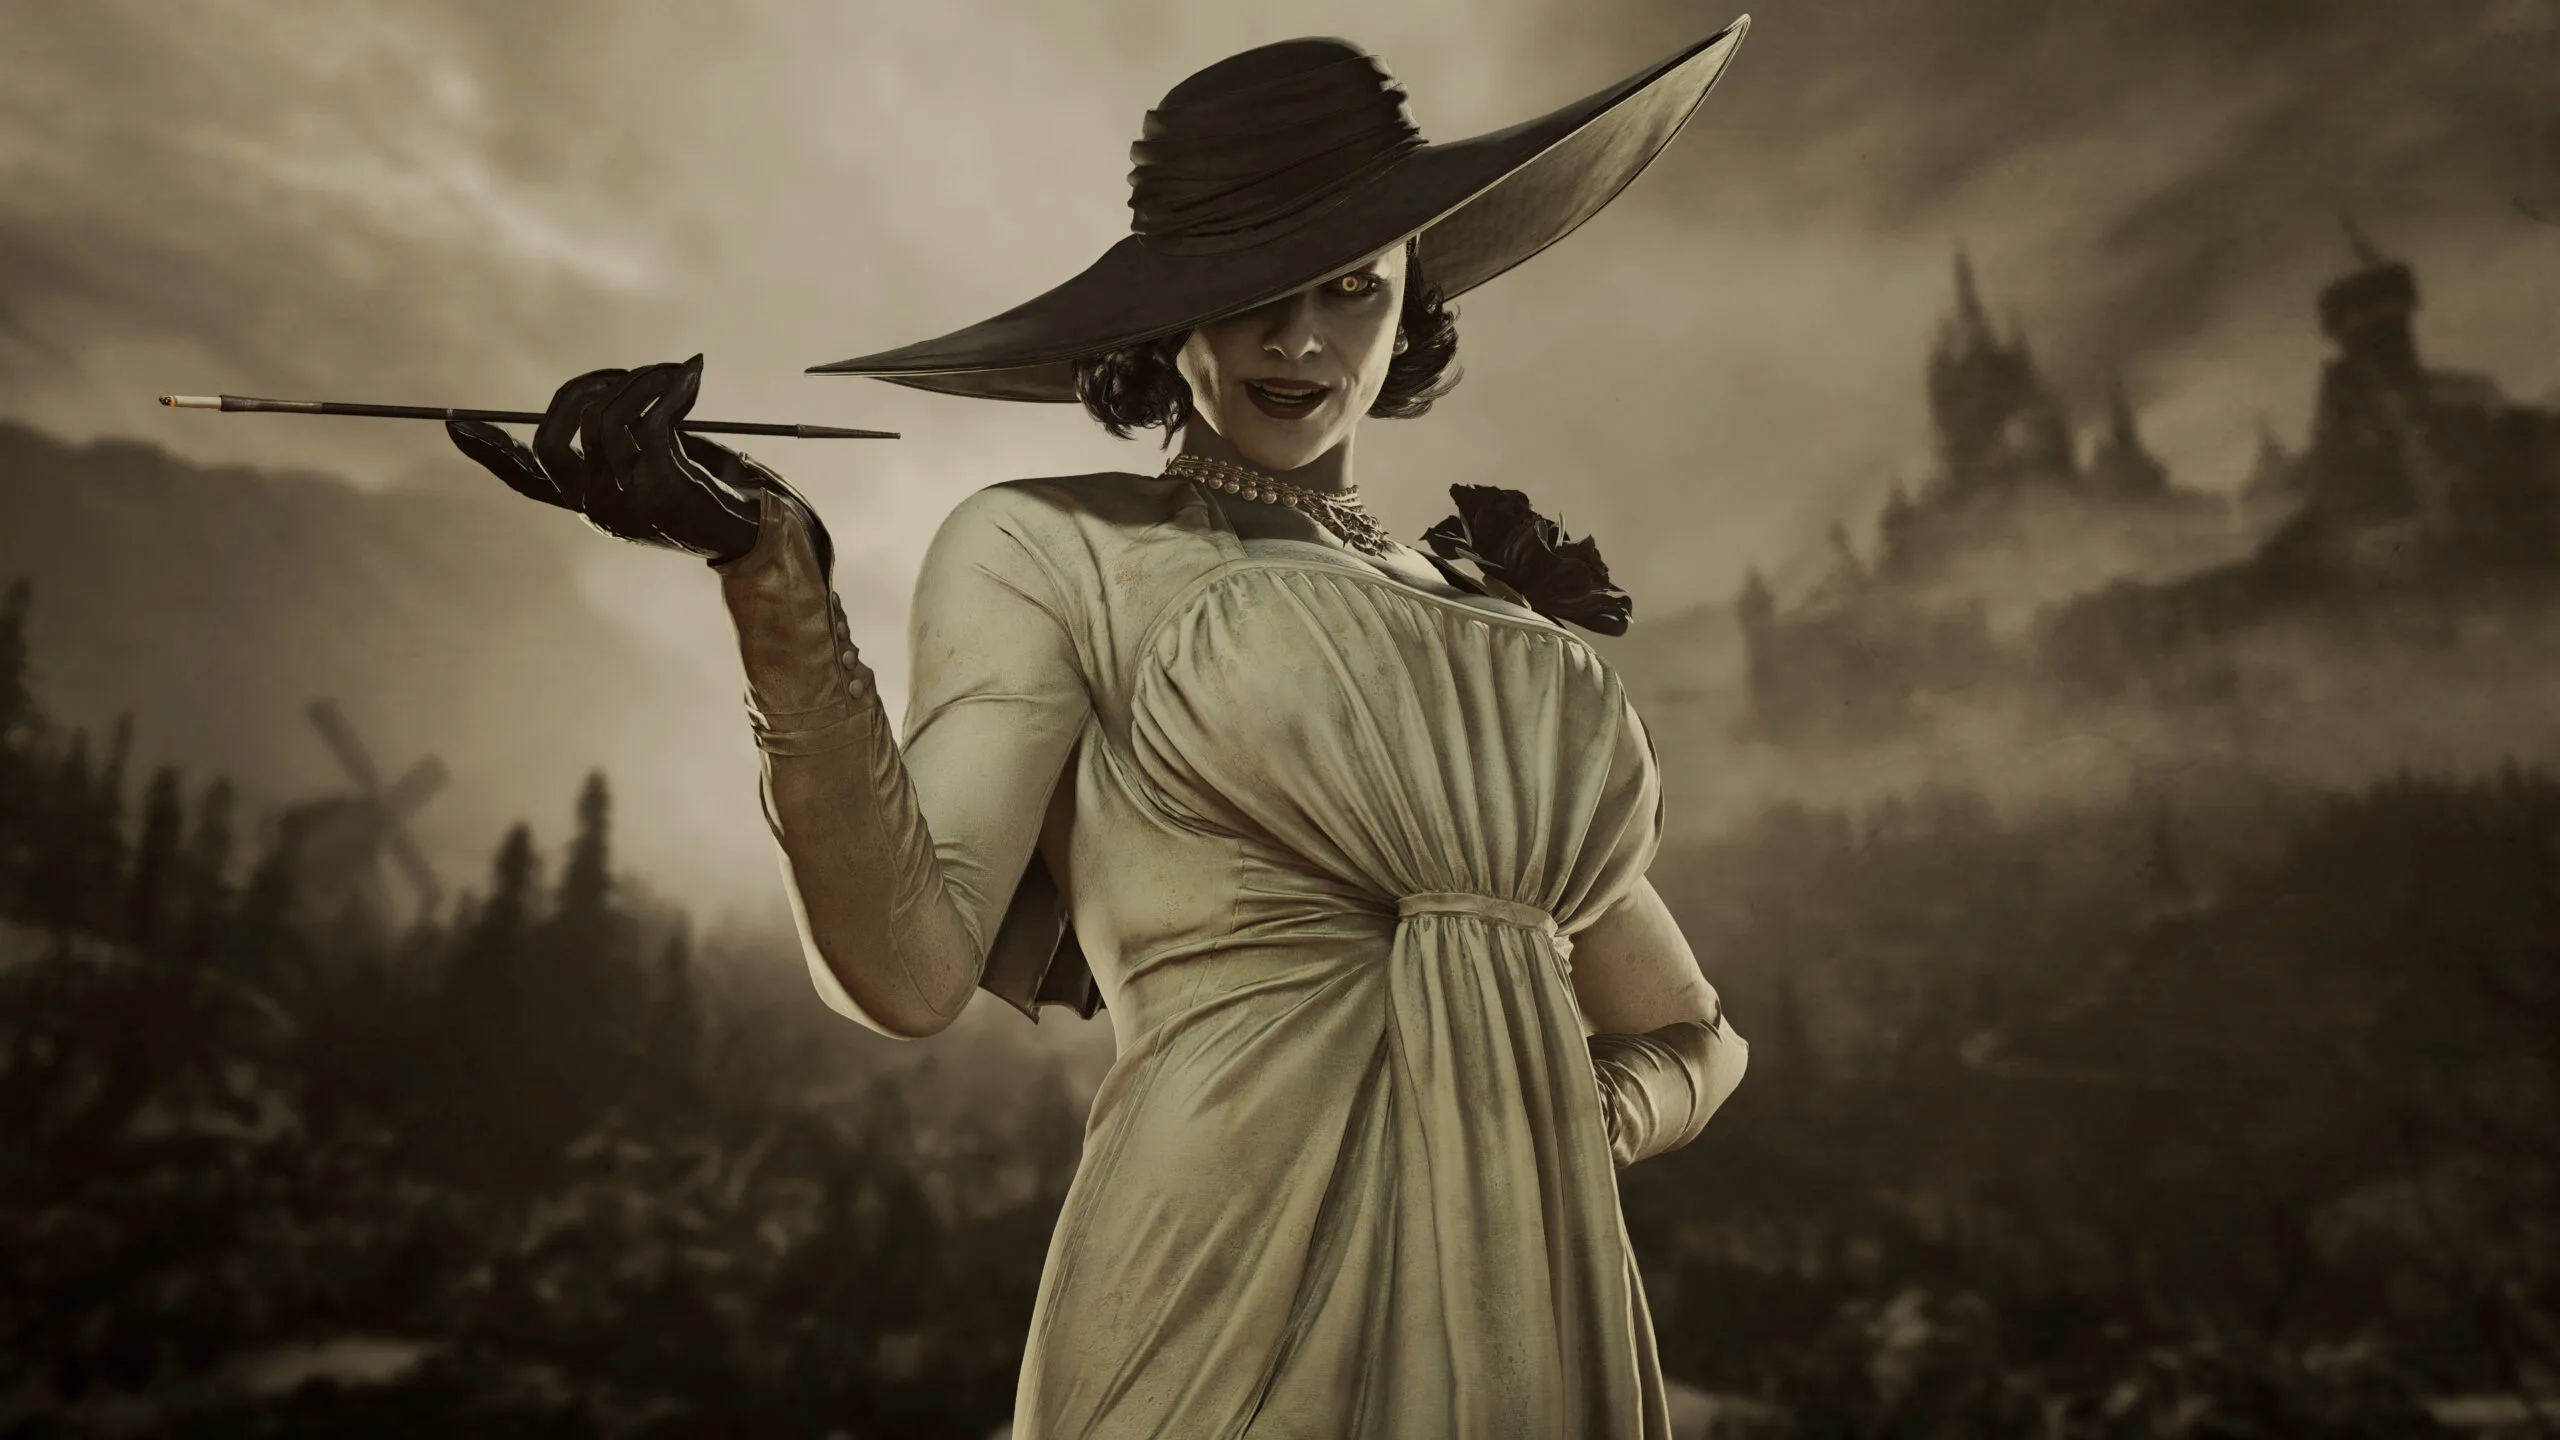 resident-evil-village-dlc-winters-expansion-will-let-you-play-as-lady